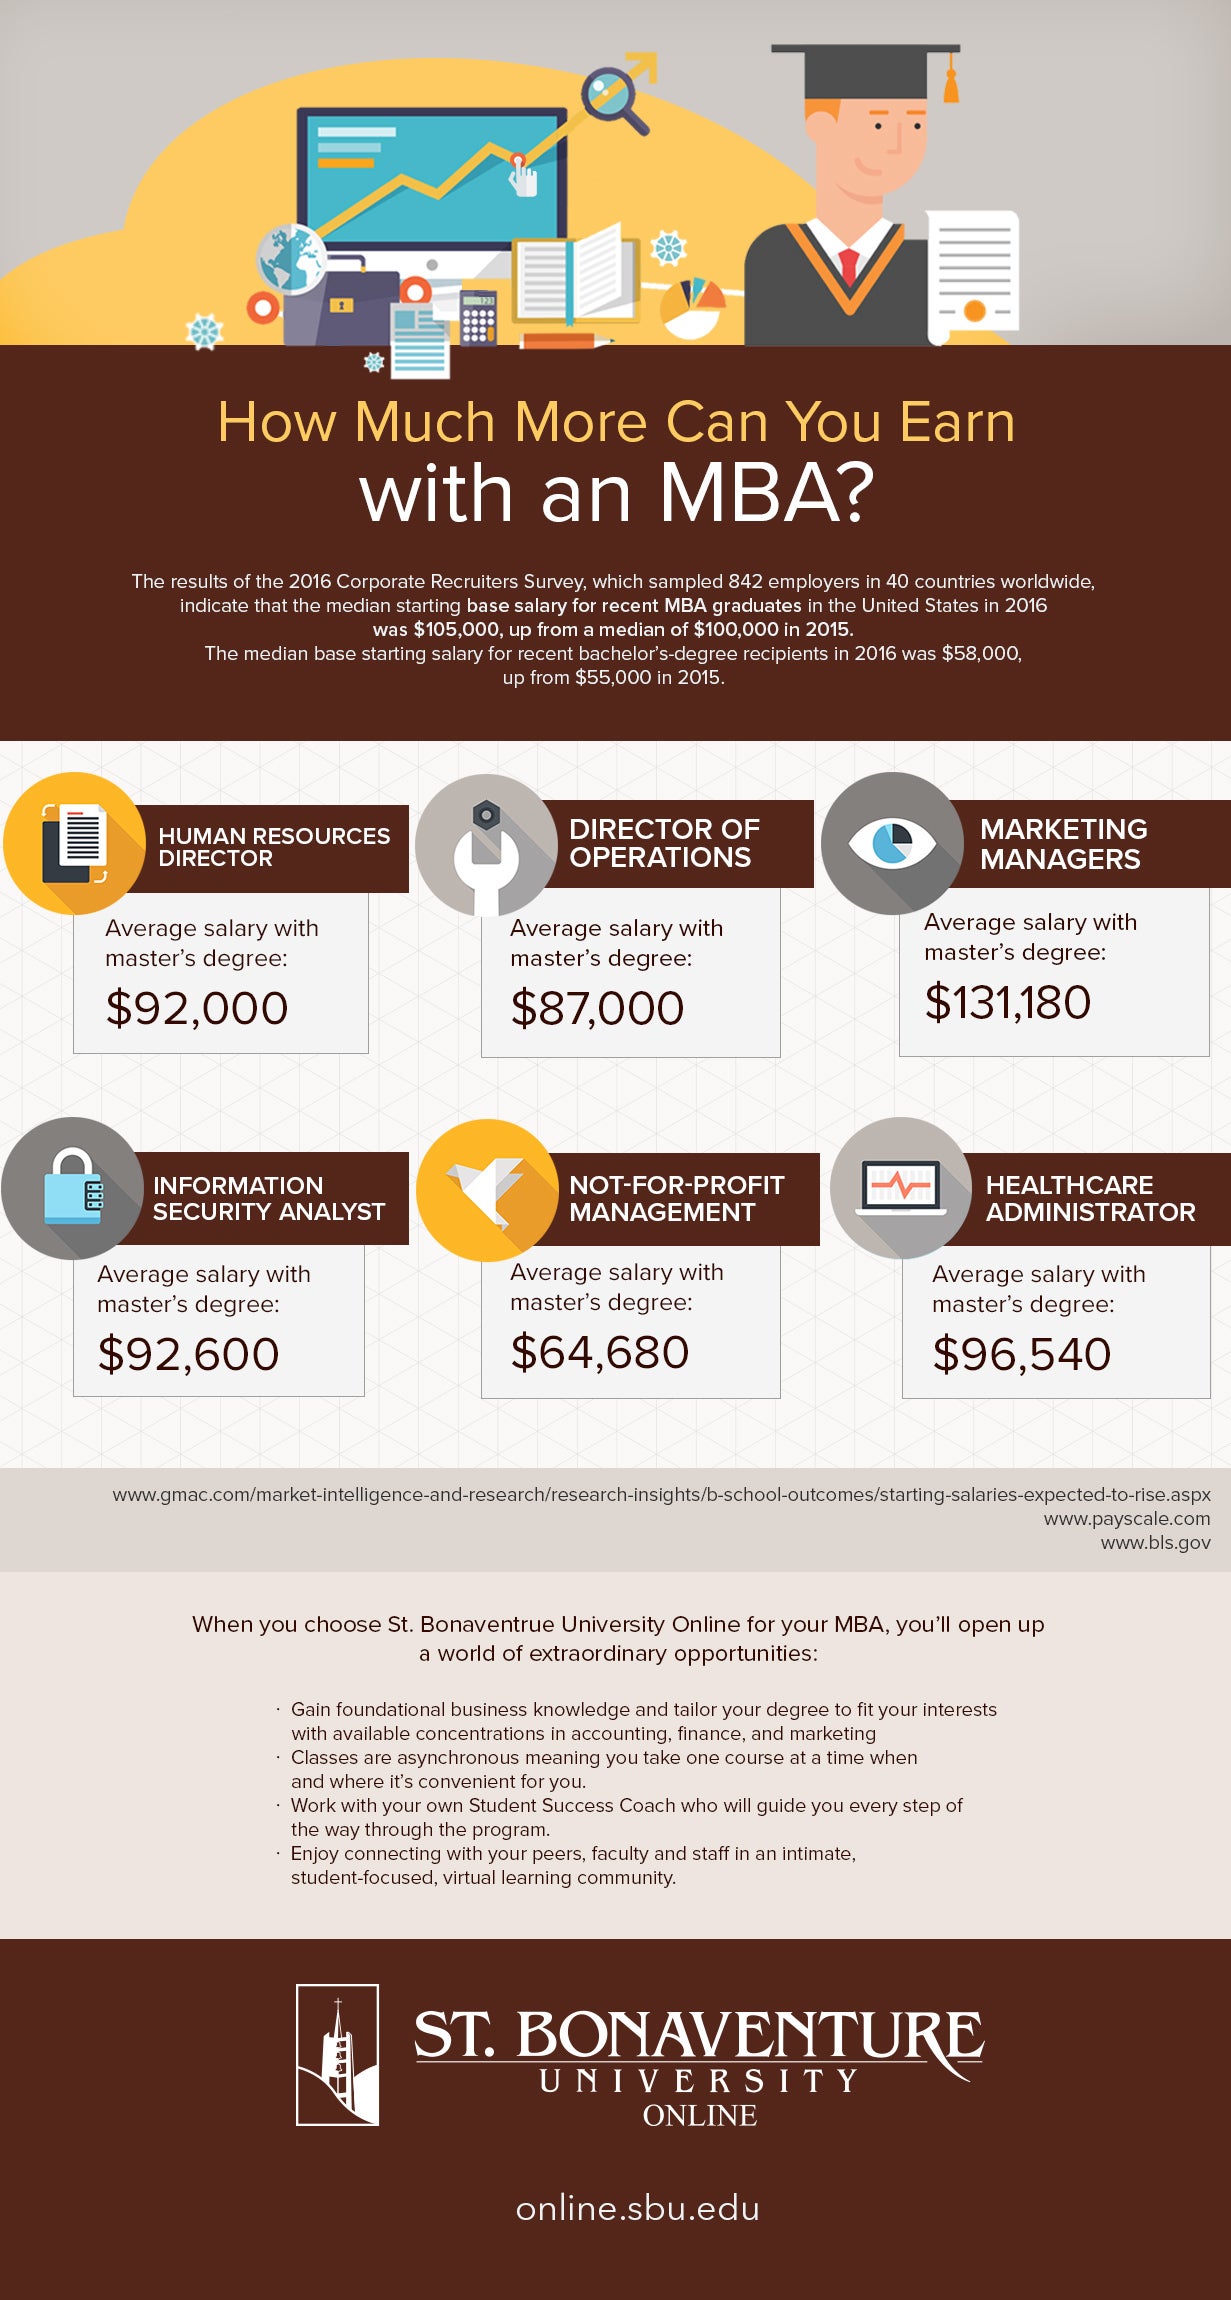 Infographic How Much More Can You Earn With an MBA?